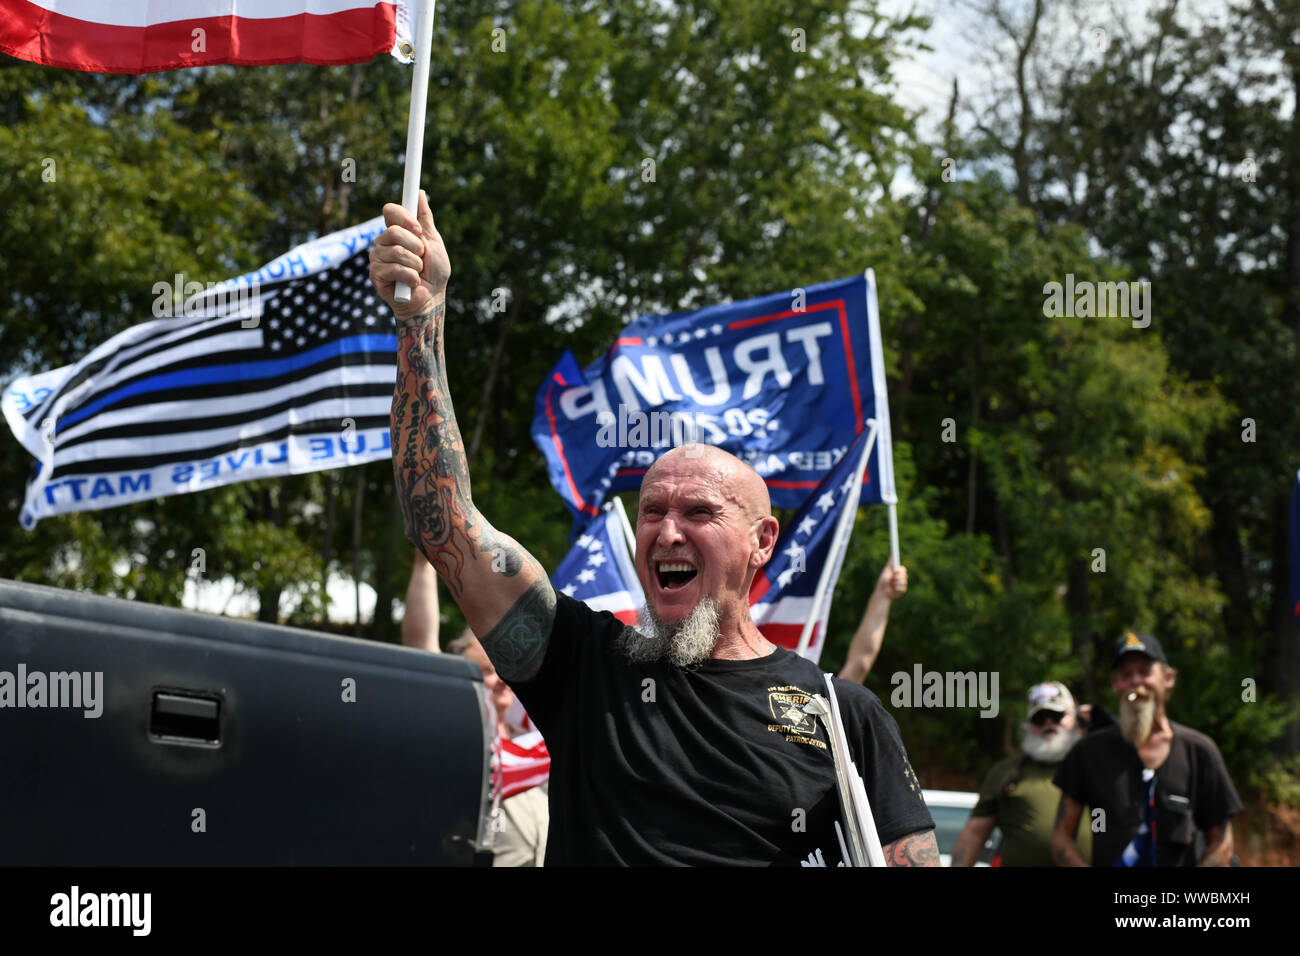 Dahlonega, Georgia, USA. 14th Sep, 2019. CHESTER DOLES, a longtime white nationalist leader, leads followers in chants of "America is great,"" as he begins what he described as an "American Patriot Rally"" to honor President Trump in Dahlonega, Georgia on Saturday. All told, around 50 people joined Doles' rally, while around 100 people joined counter-protests at the event, which drew 600 law enforcement officers from surrounding counties. Credit: Miguel Juarez Lugo/ZUMA Wire/Alamy Live News Stock Photo